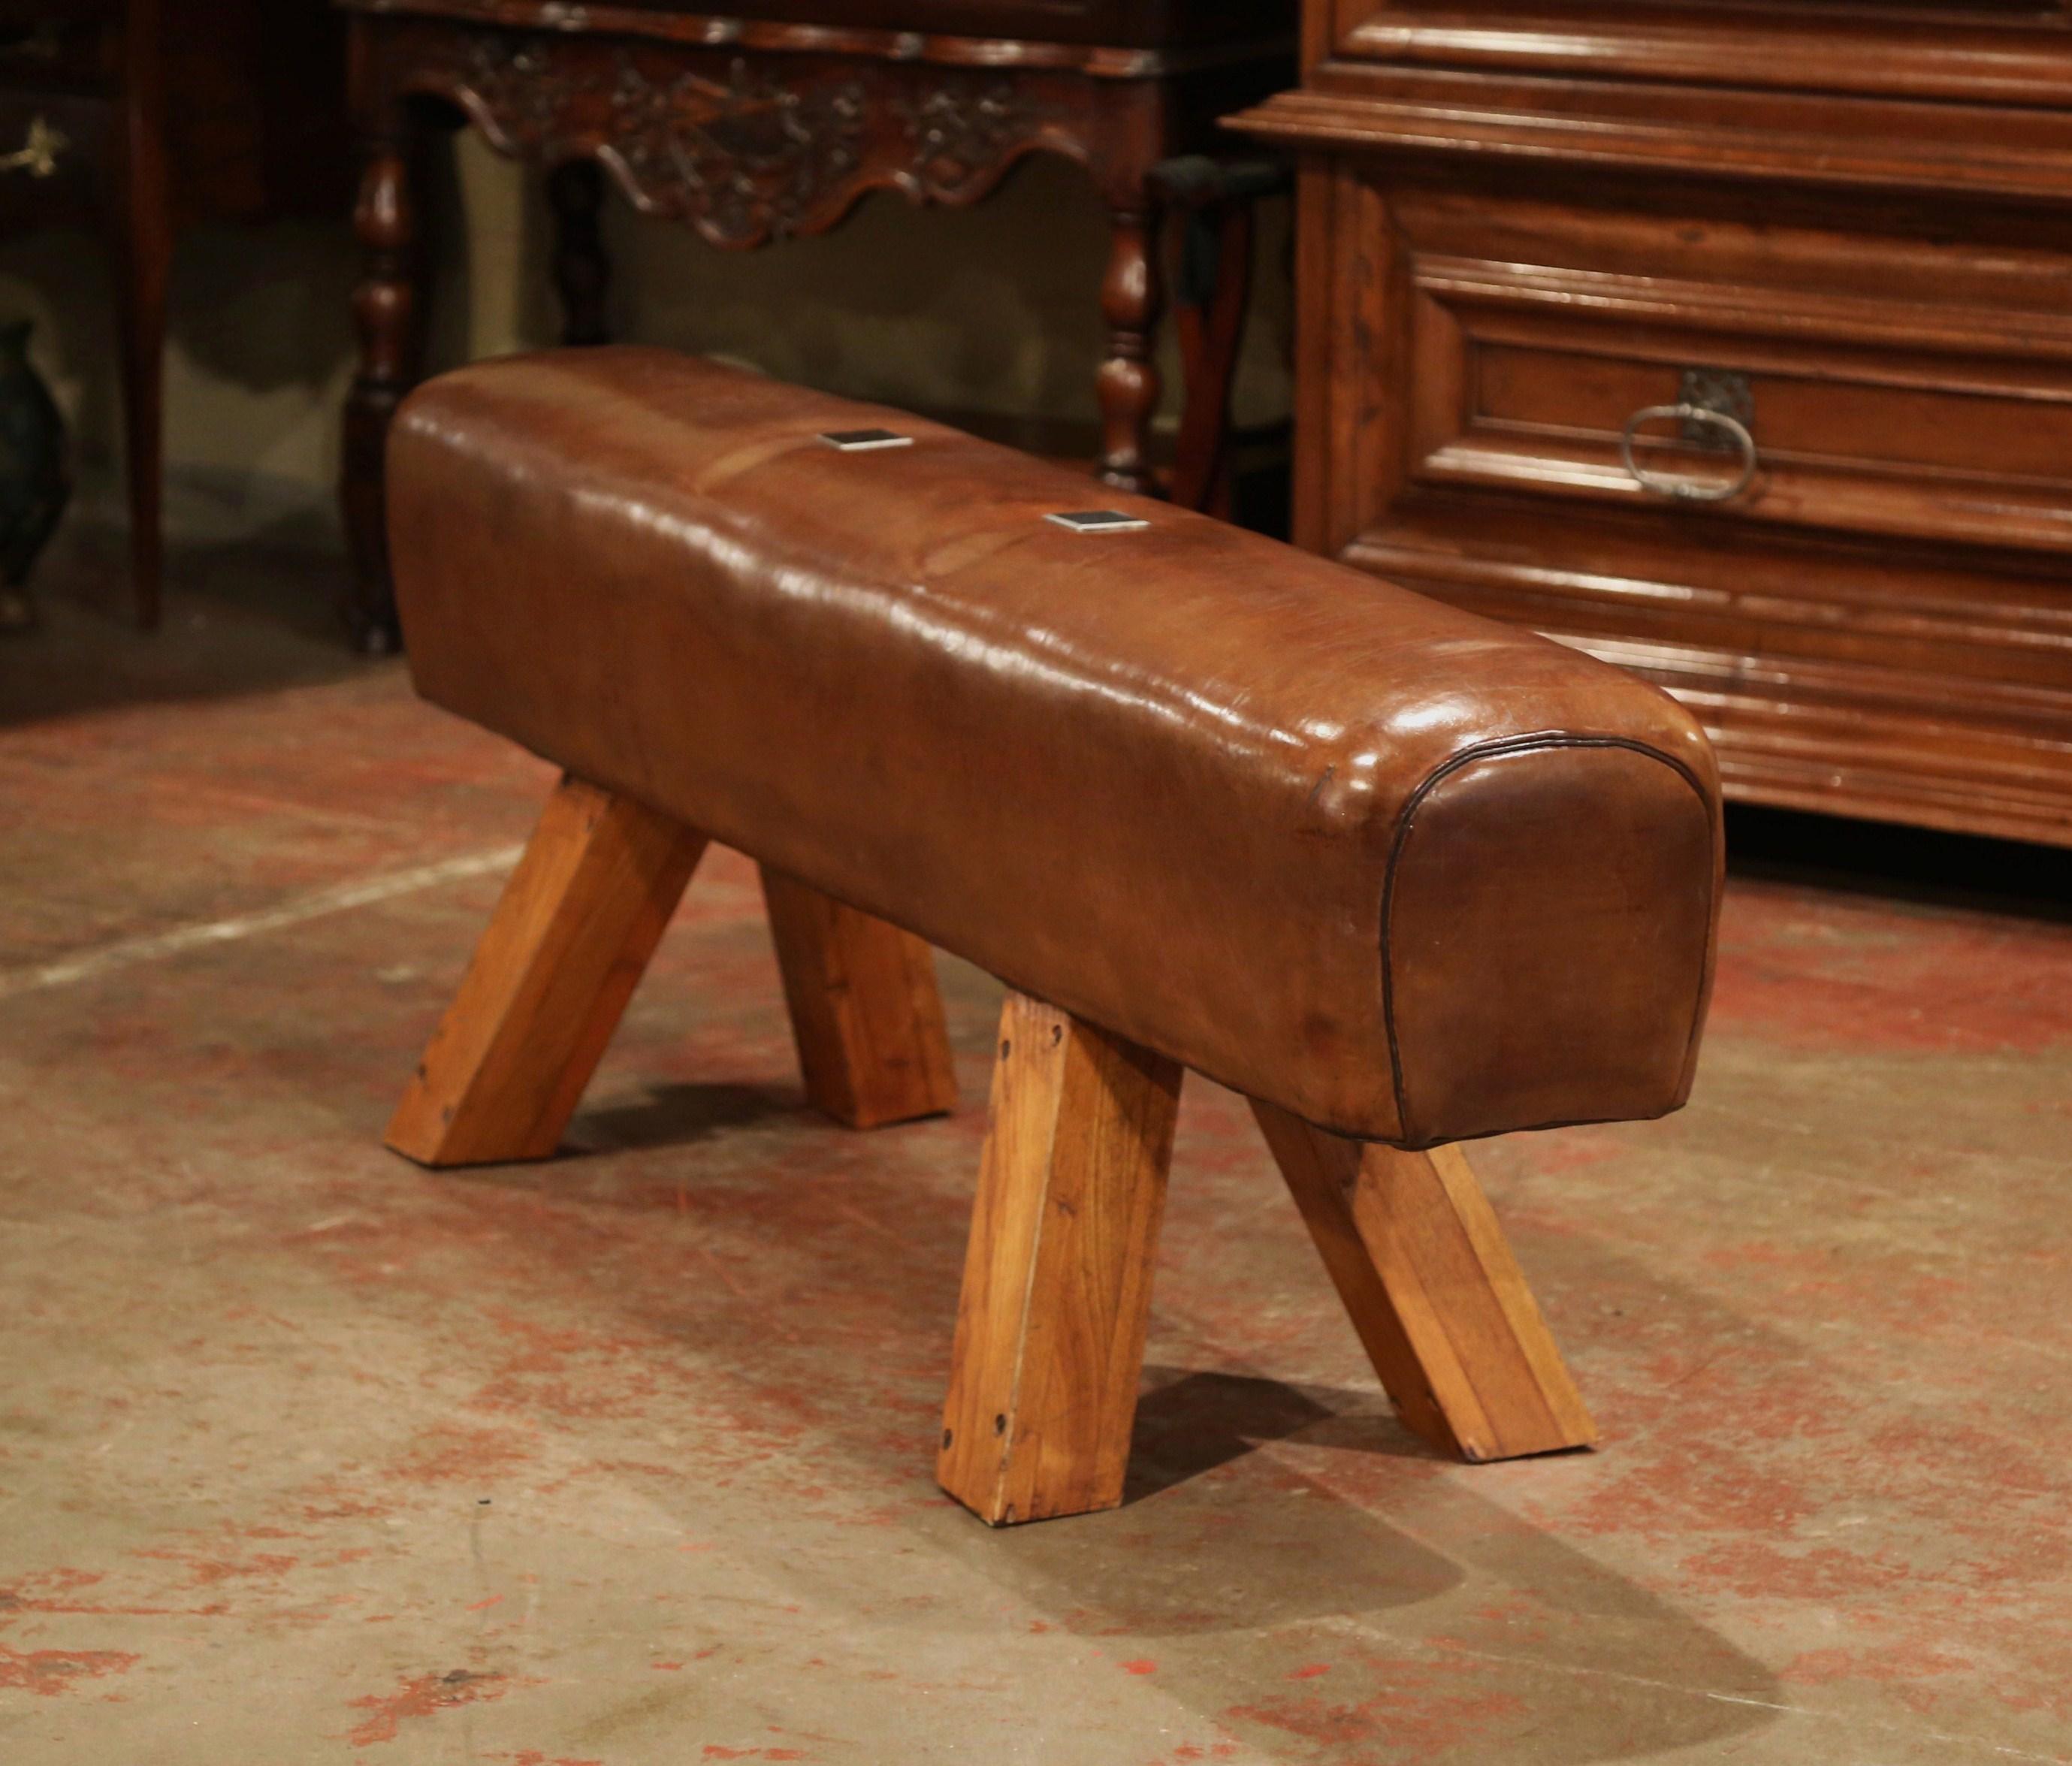 This antique, long gymnasium leather pommel horse bench was crafted in the Czech Republic, circa 1920. The rustic piece sits on four slant wooden legs and the long seat with rounded corners is upholstered with the original patinated brown leather;